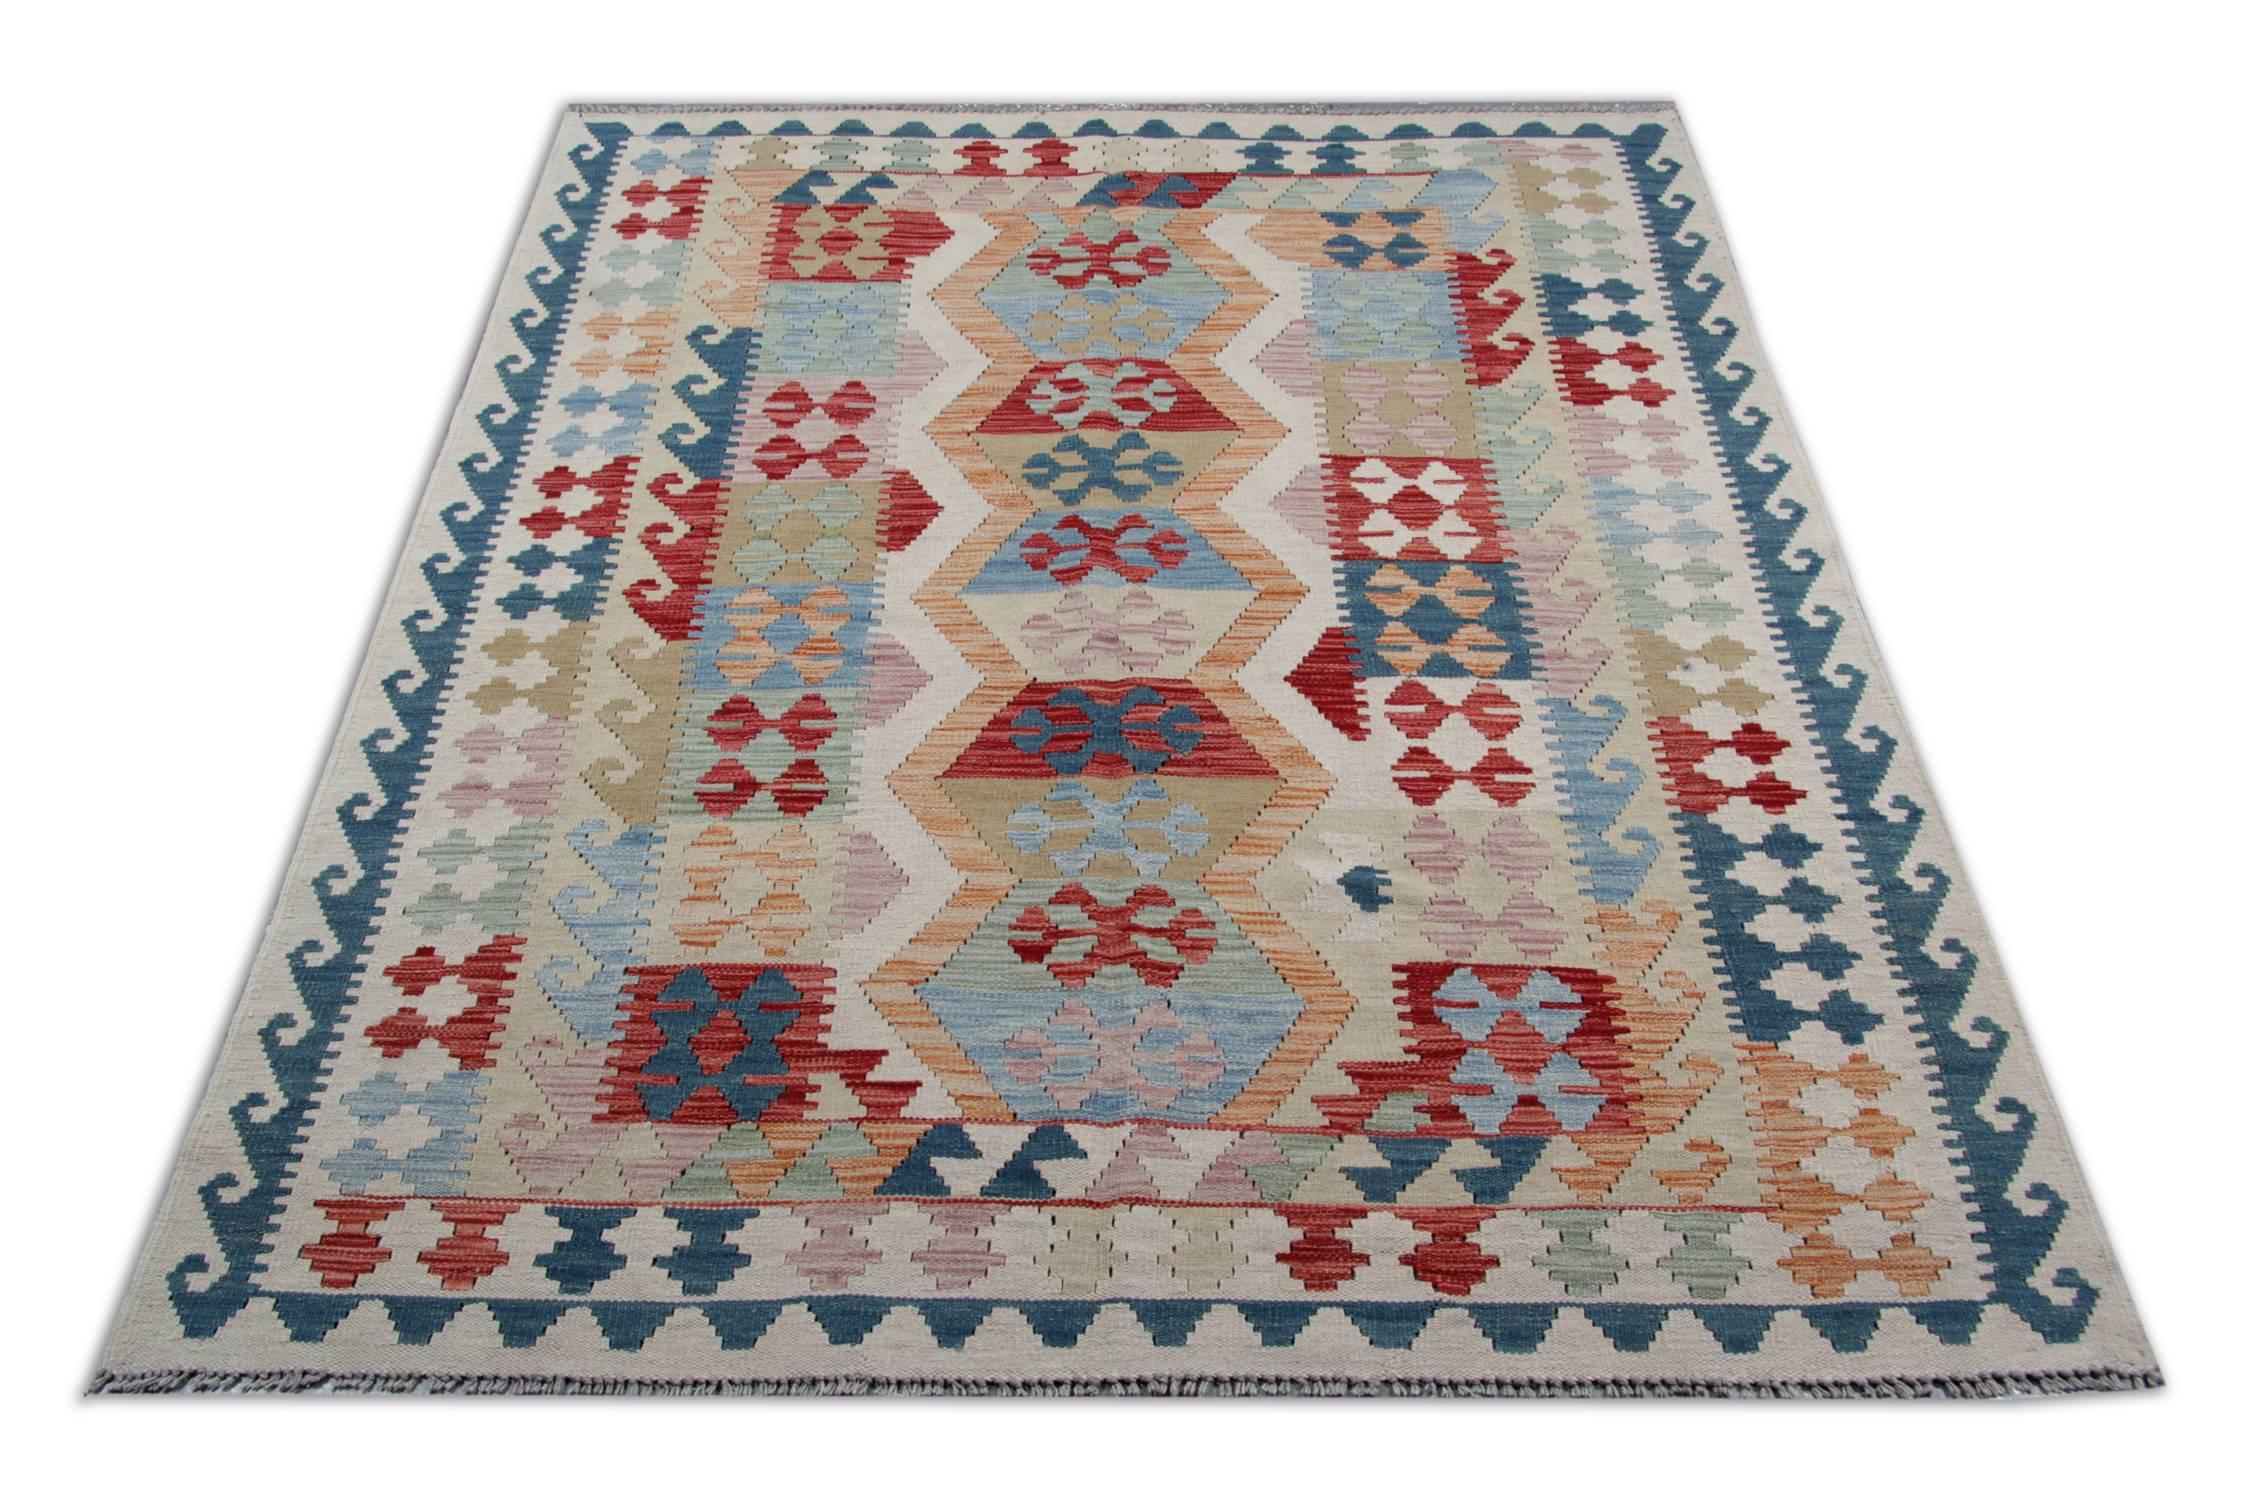 This is an oriental rug example of a flat-weave rug that has been woven by Uzbek and Turkmen tribes in North Afghanistan. This tribal rug was carefully handmade using only wool and cotton. The use of organic dyes is enhancing the quality of this